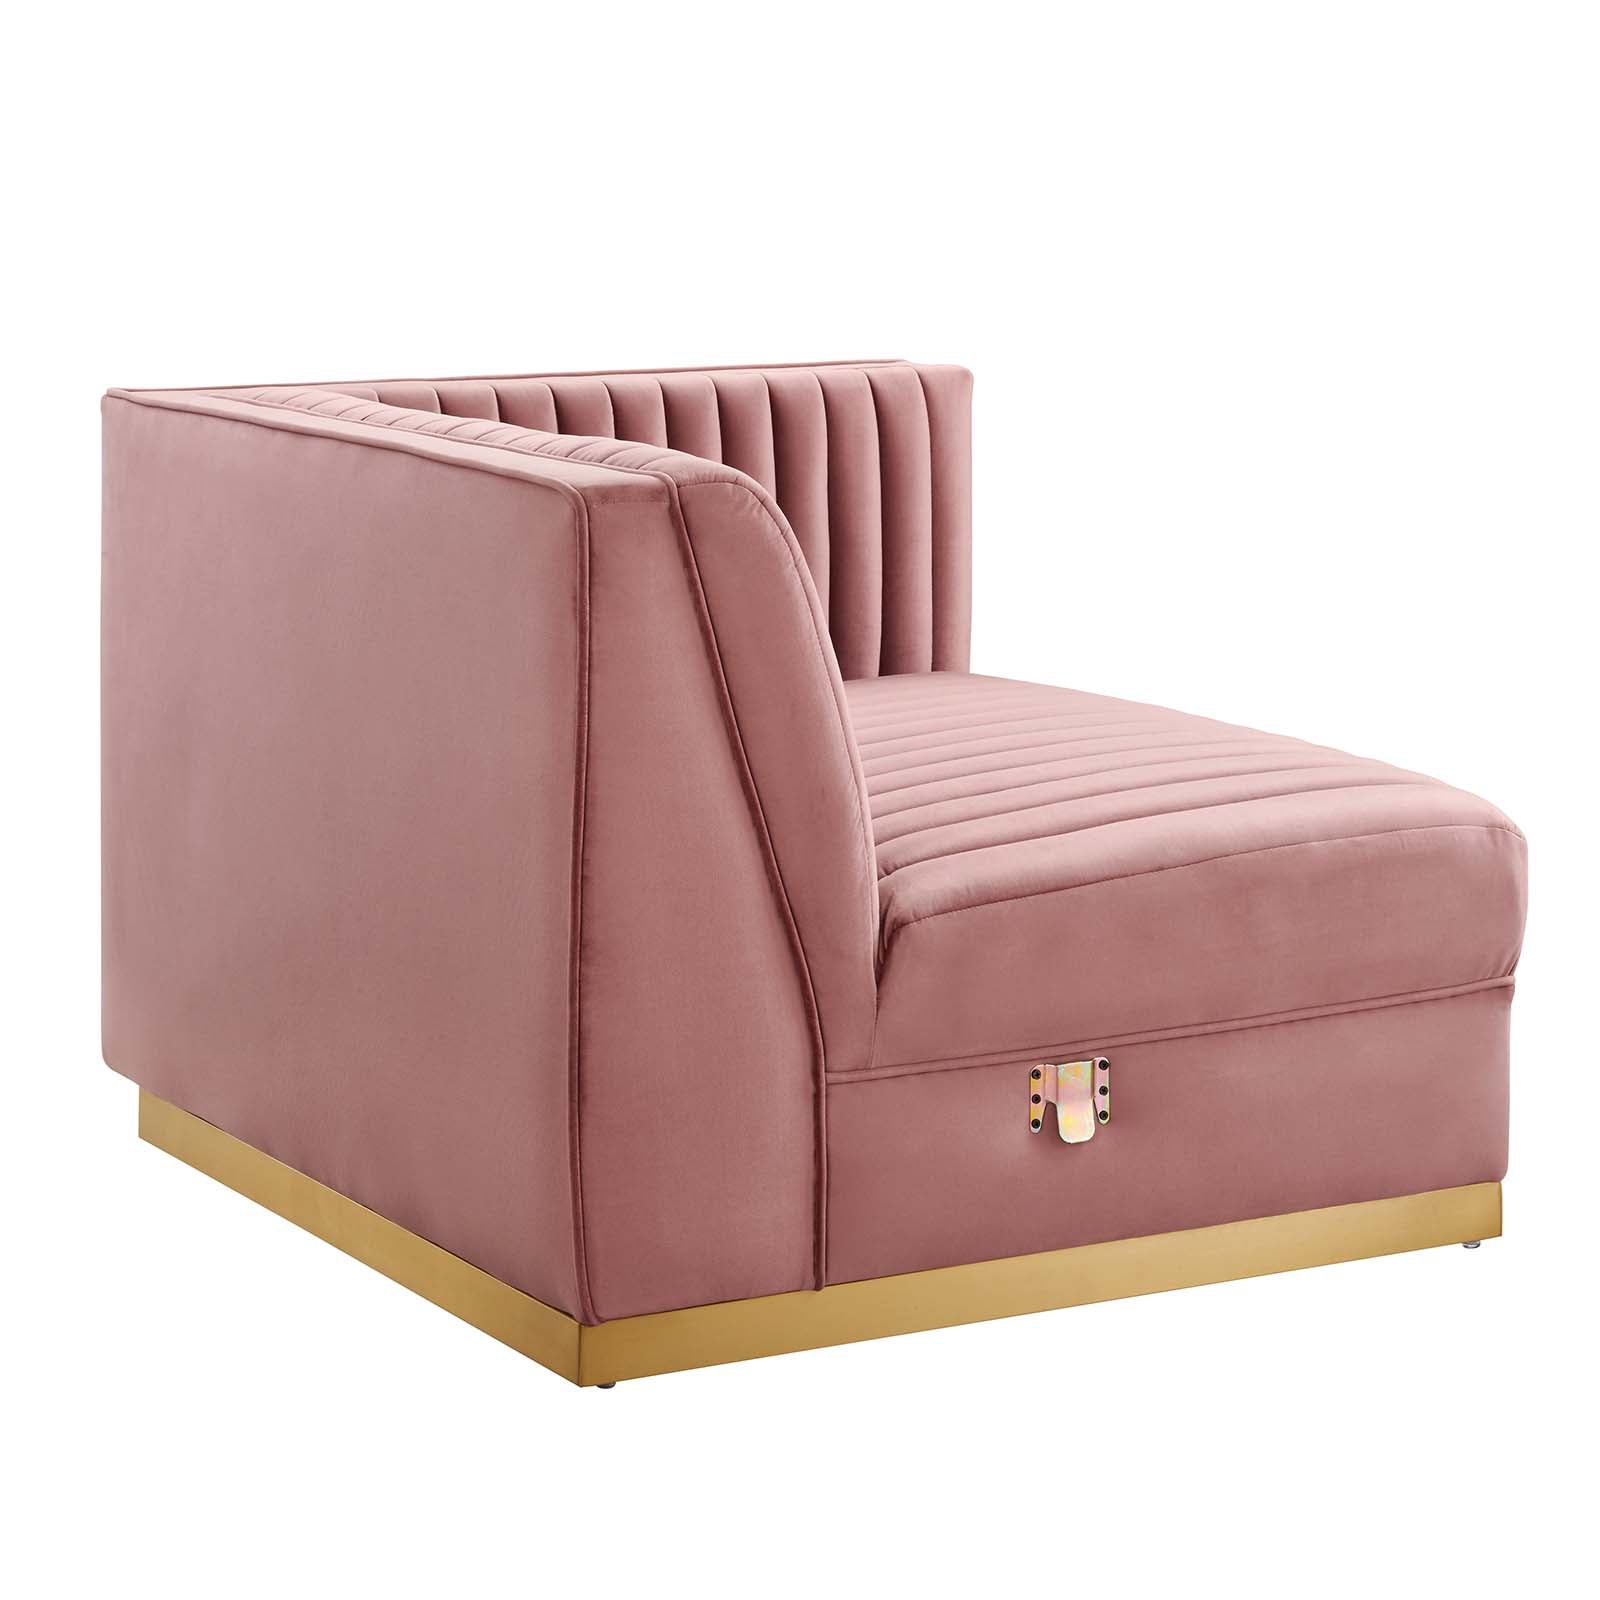 Modway Sectional Sofas - Sanguine Channel Tufted Performance Velvet 4 Piece Left-Facing Modular Sectional Sofa Dusty Rose